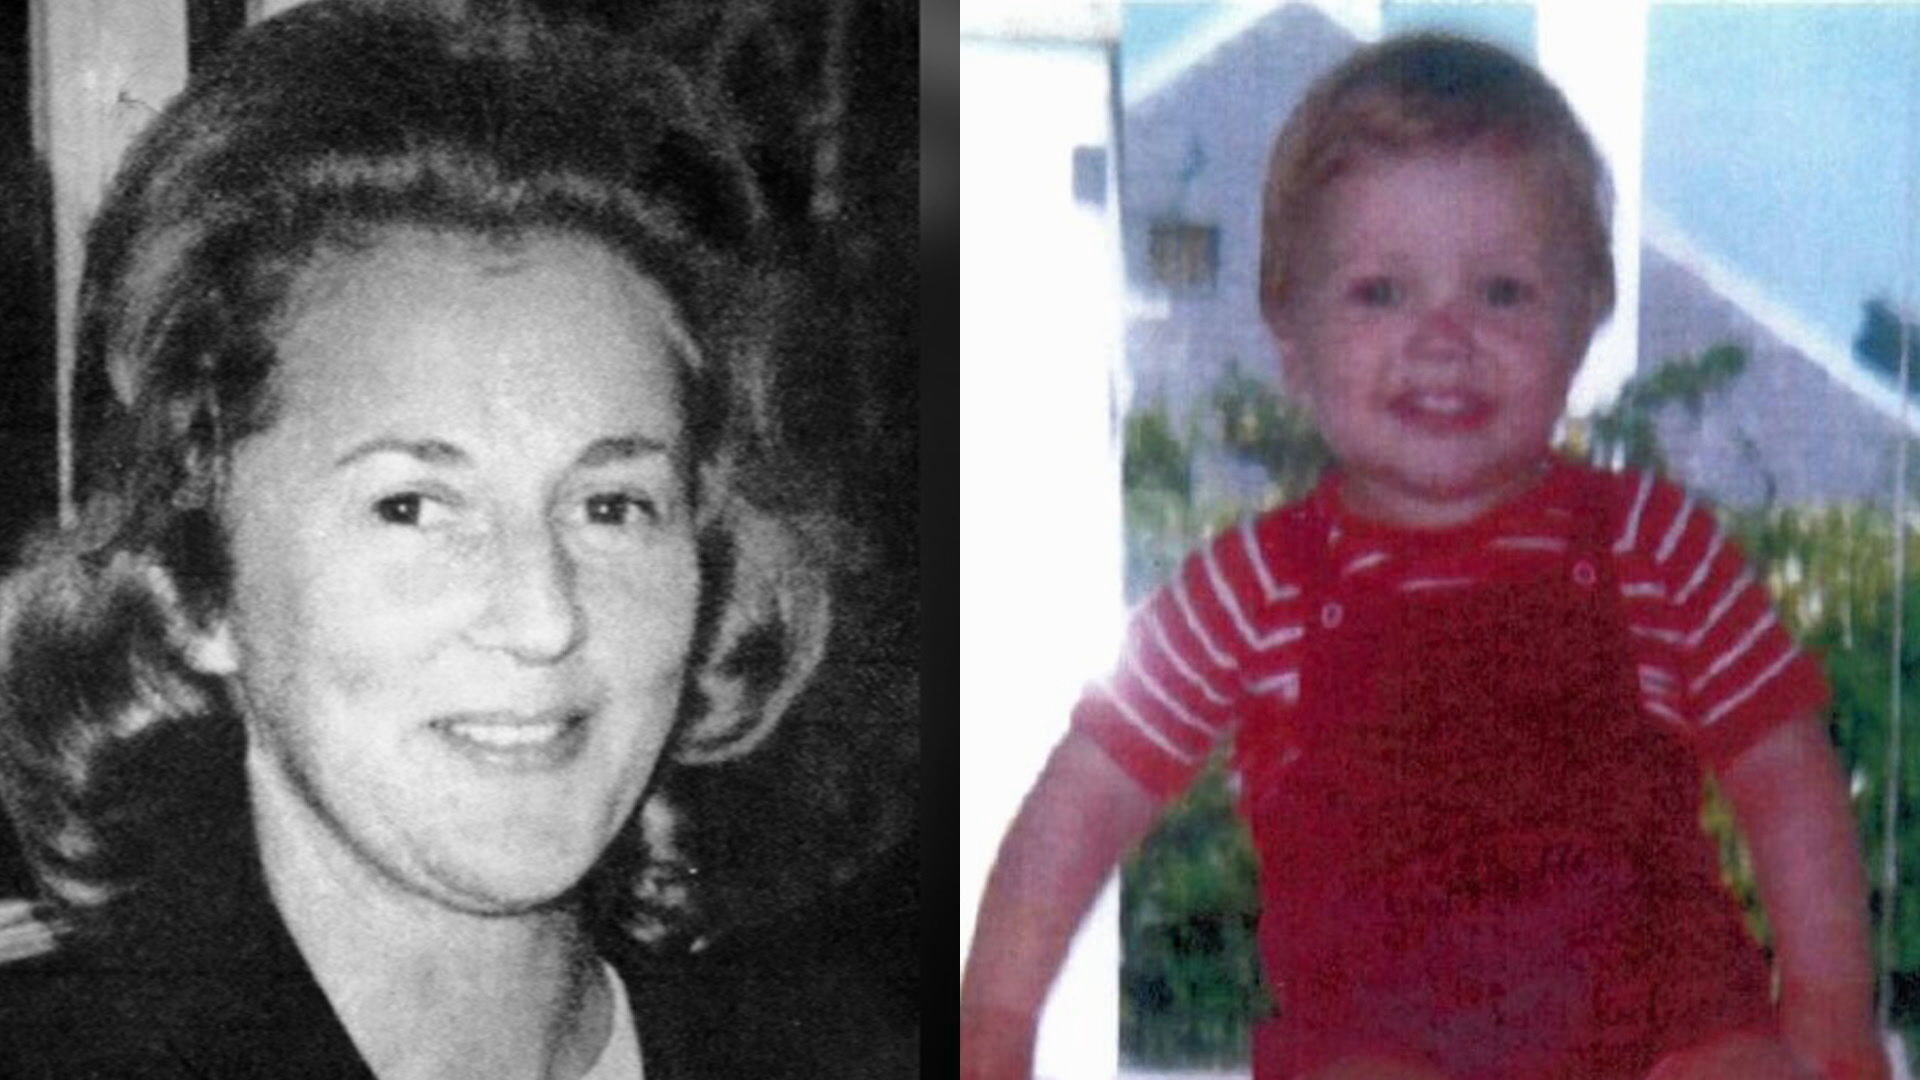 Renee MacRae and her son Andrew are thought to have been killed in November 1976.